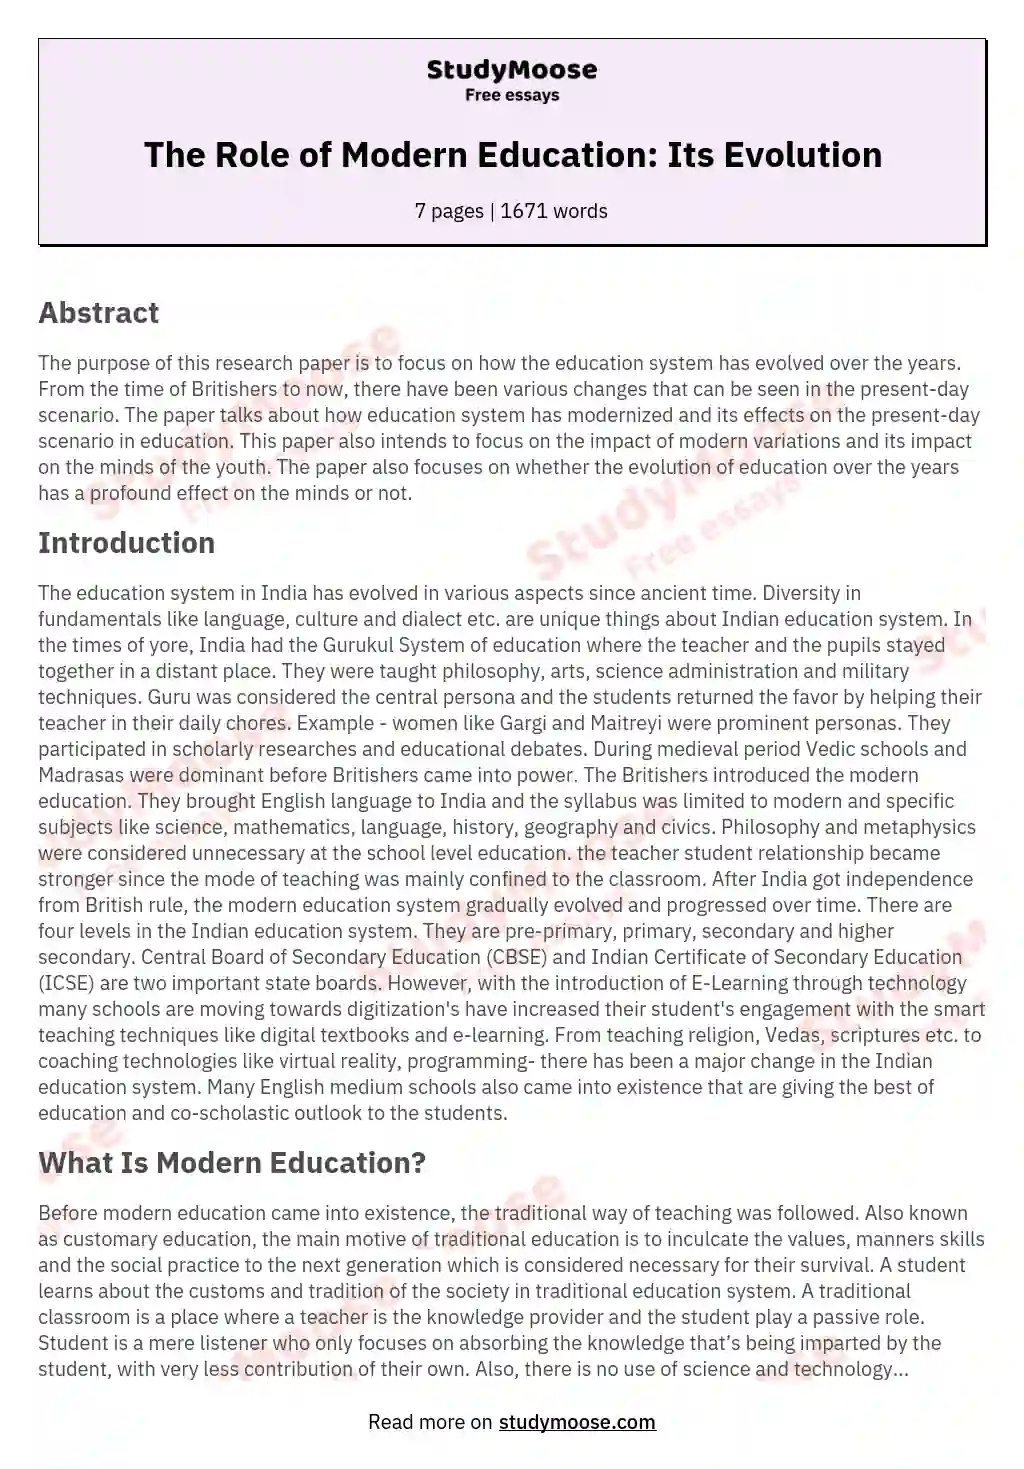 essay about modern education